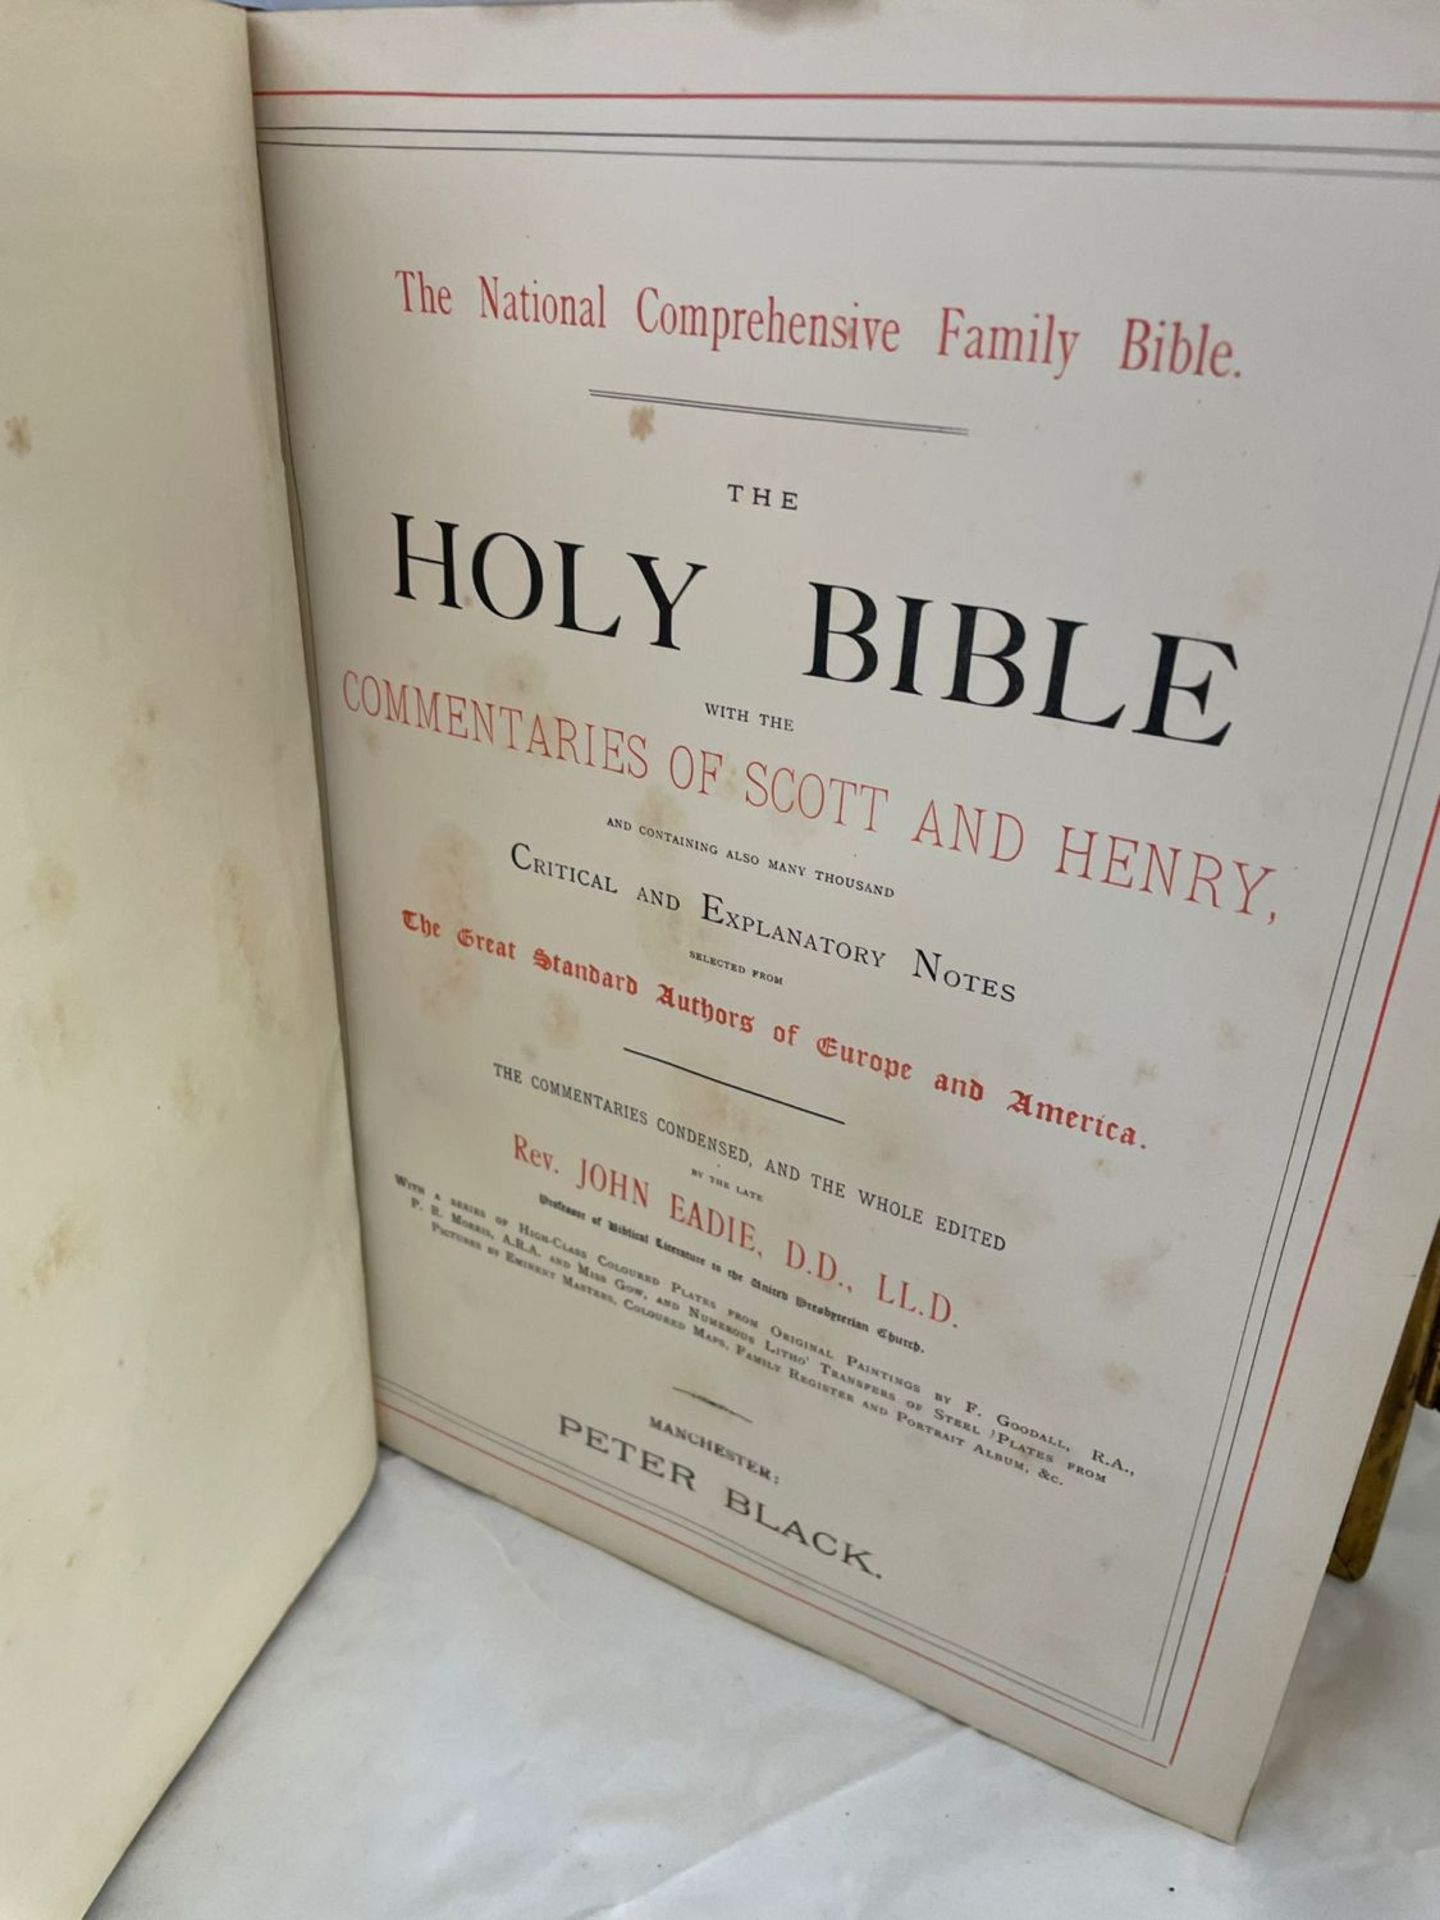 HOLY BIBLE - 'The National Comprehensive Family Bible' - Image 4 of 8